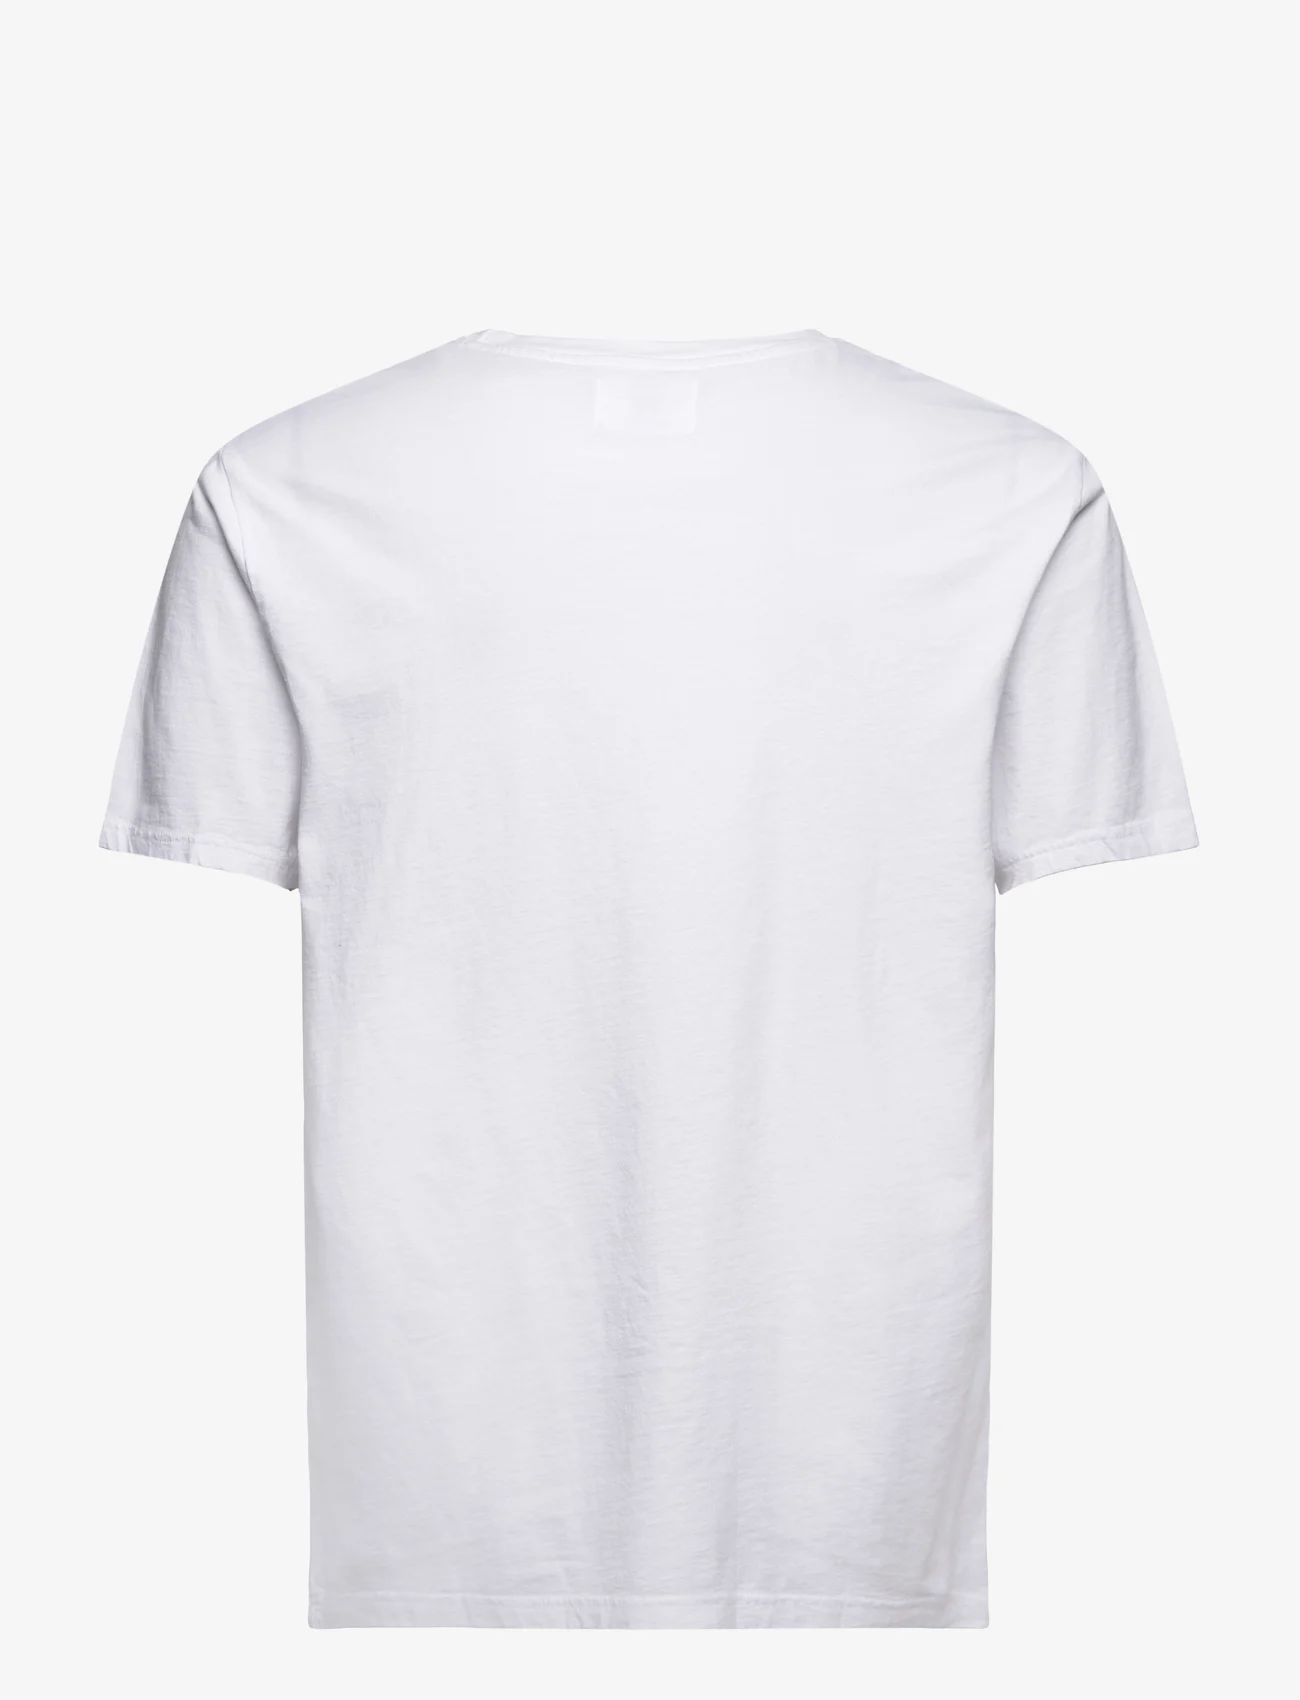 Double A by Wood Wood - Ace T-shirt - kortermede - white/white - 1